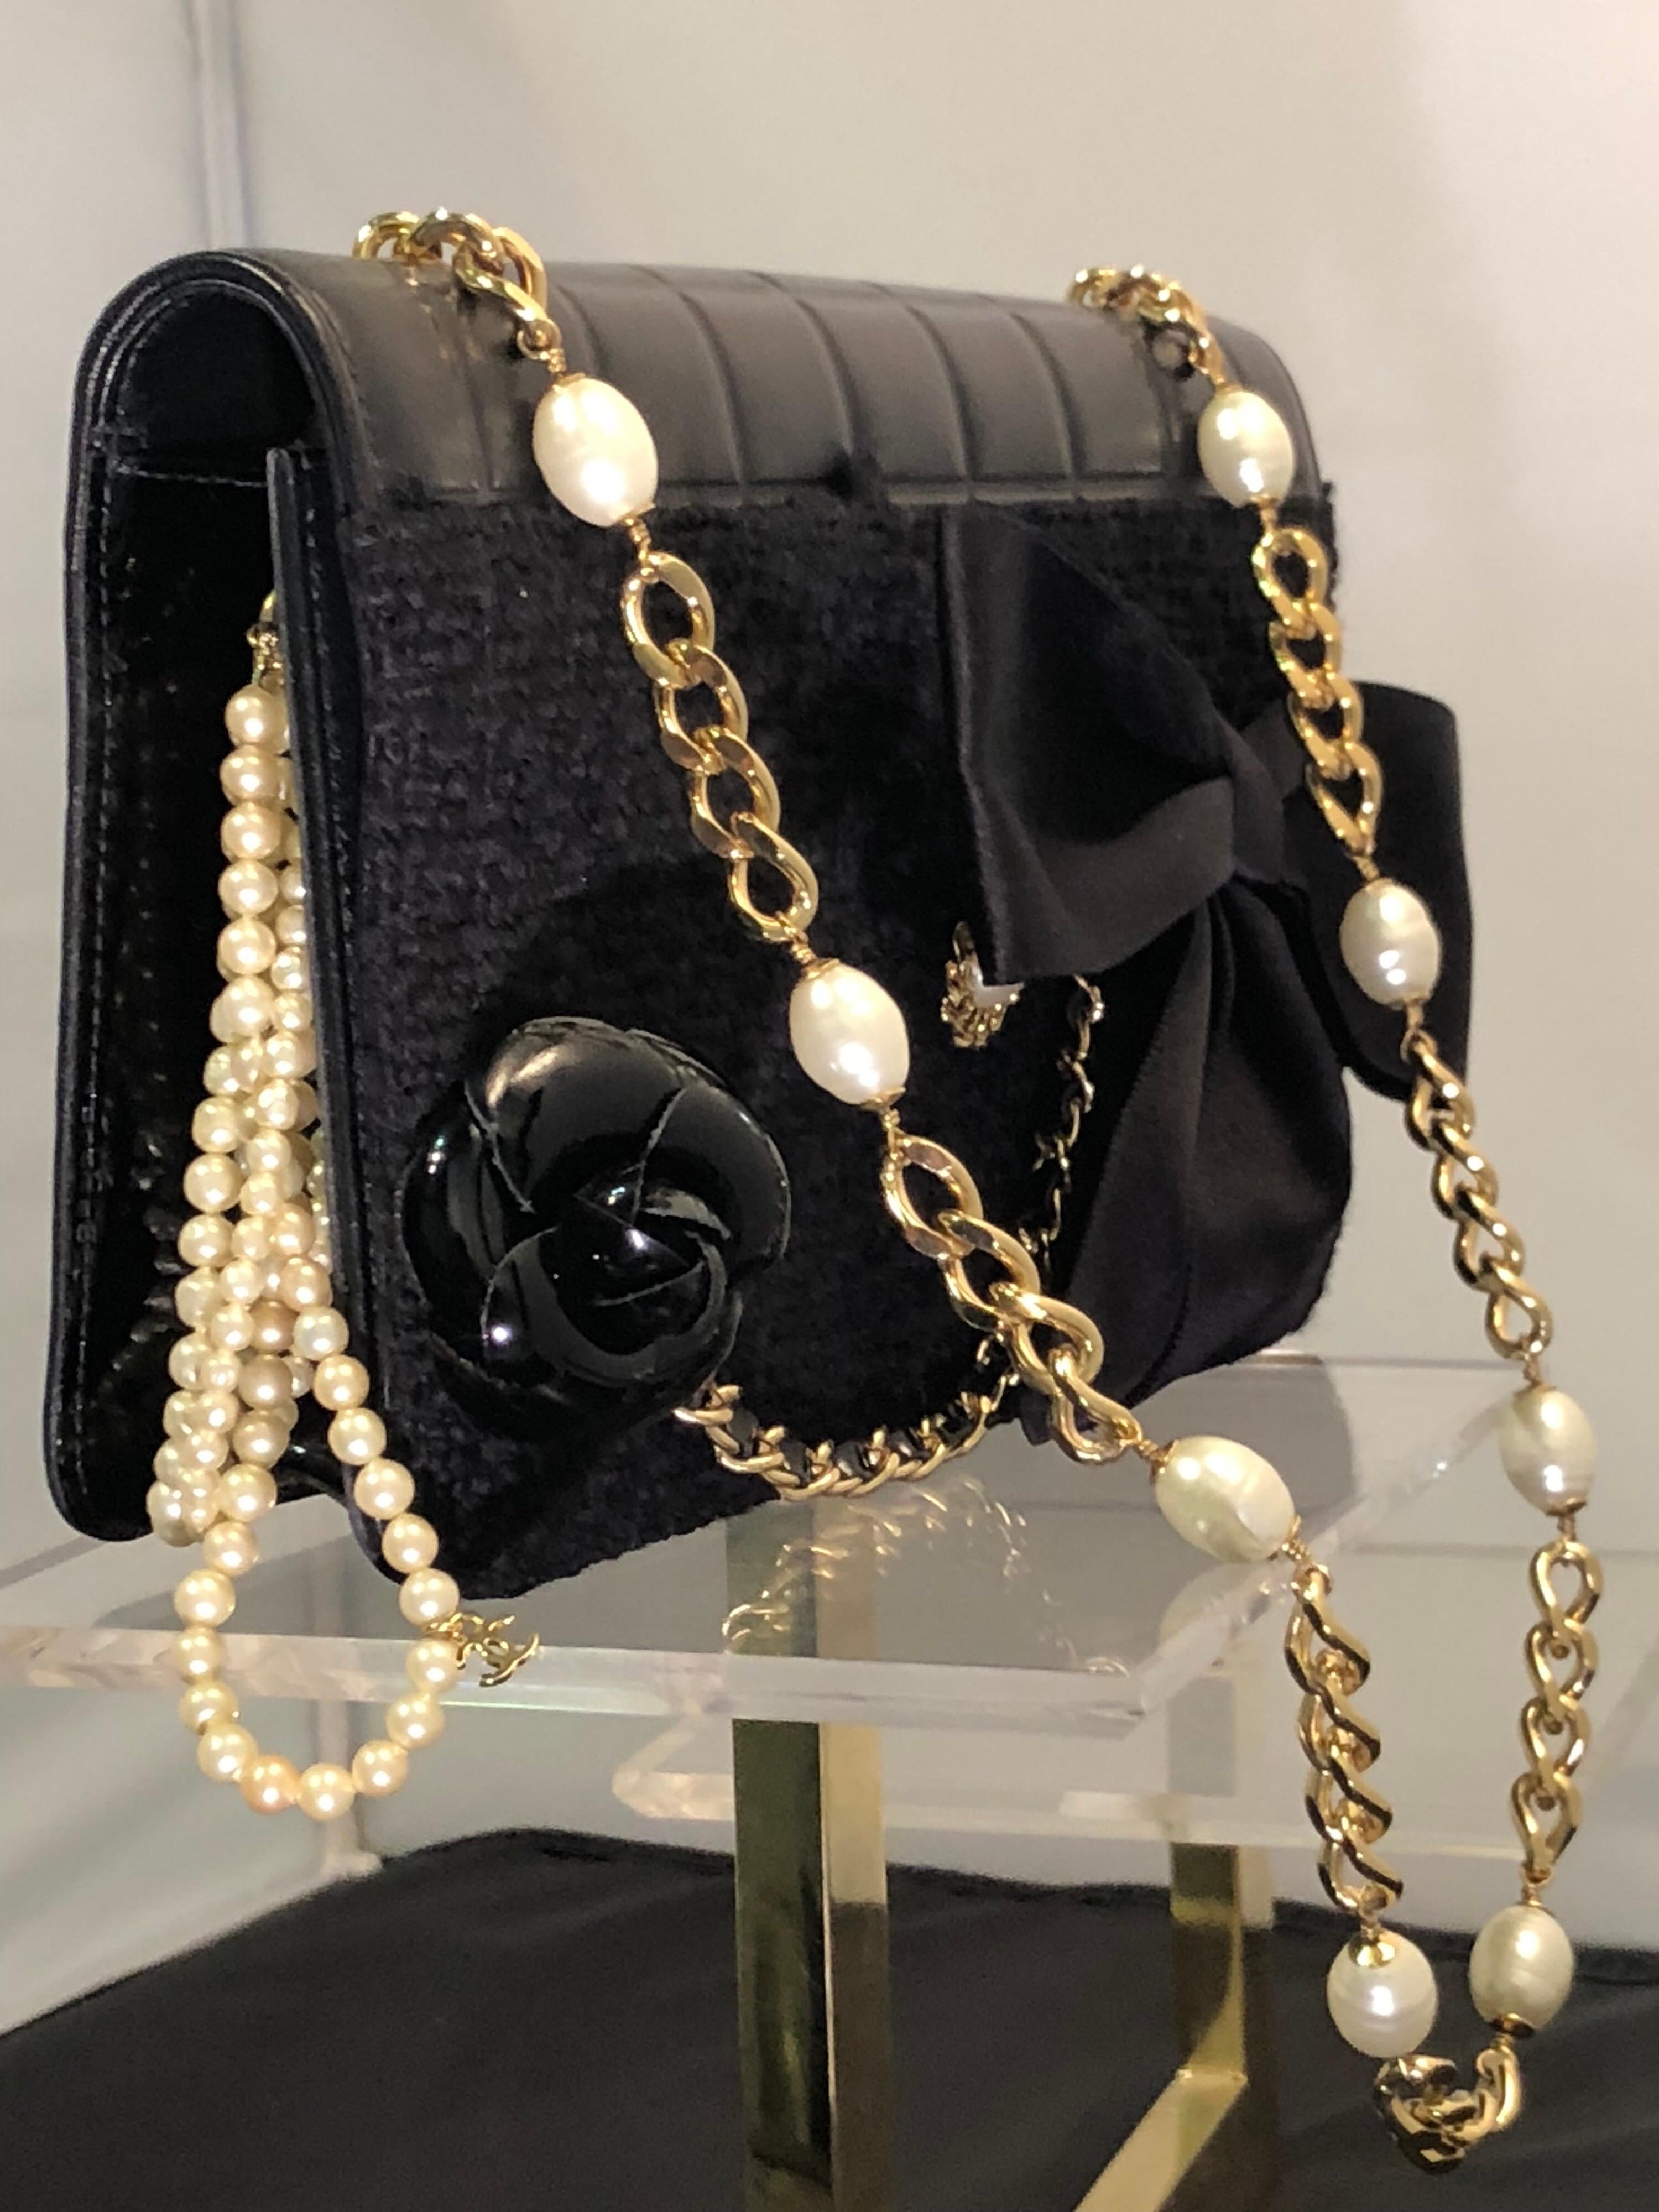 Women's Chanel Black Boucle / Kid Leather Handbag with Camellia and CC Pearls